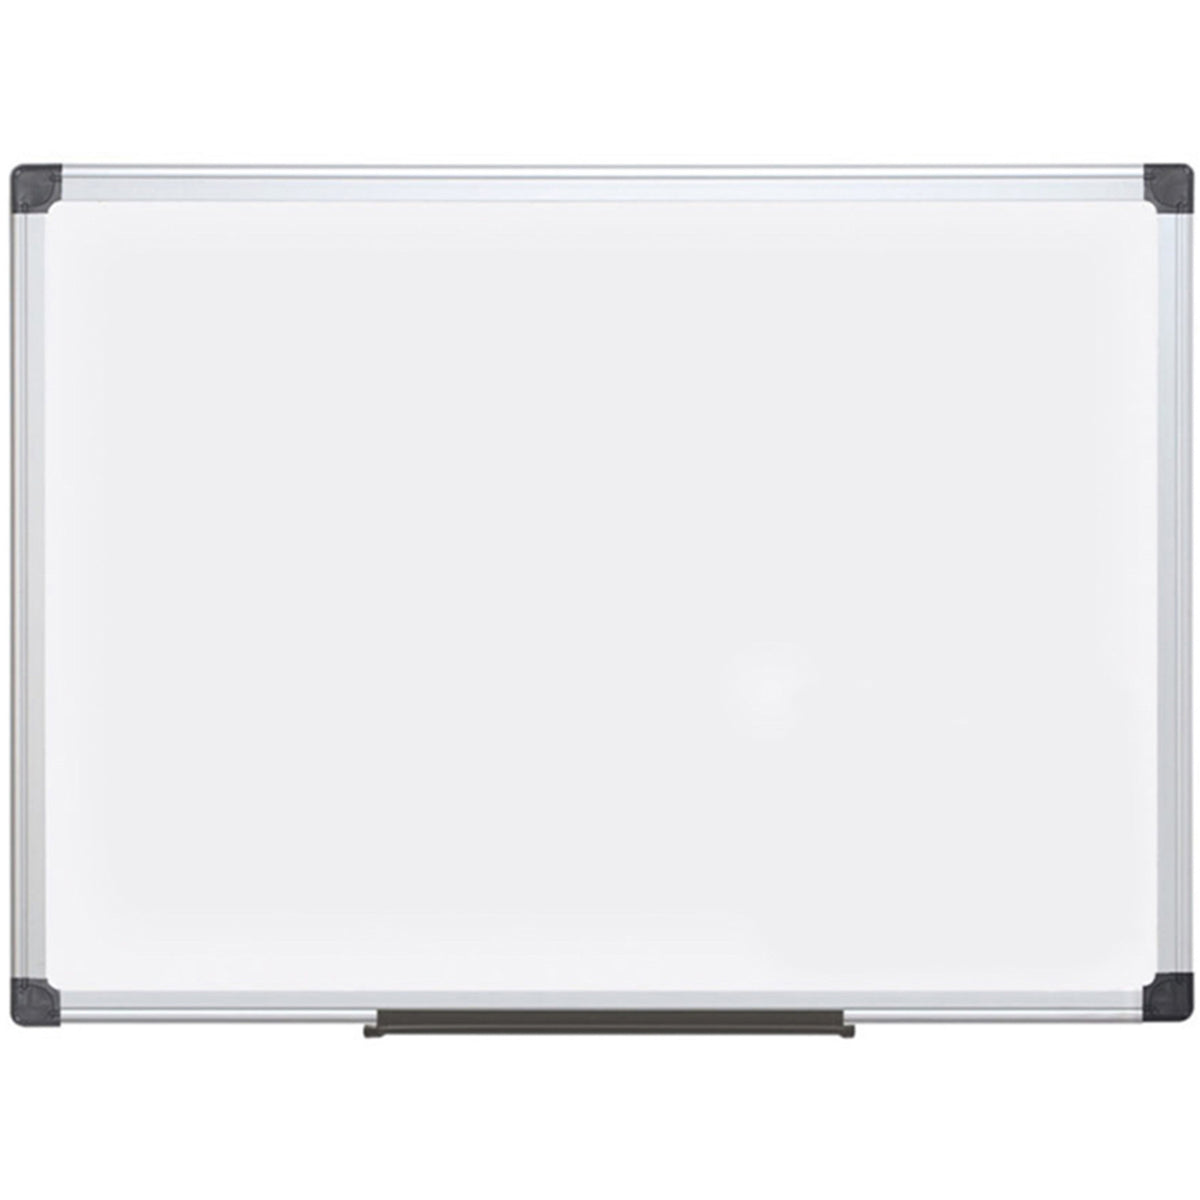 MA2707170 Maya Series Magnetic Dry Erase Board, Laquered Steel Whiteboard, Snap-On Marker Tray, Wall Mounting Kit, 48" x 72", Aluminum Frame by MasterVision